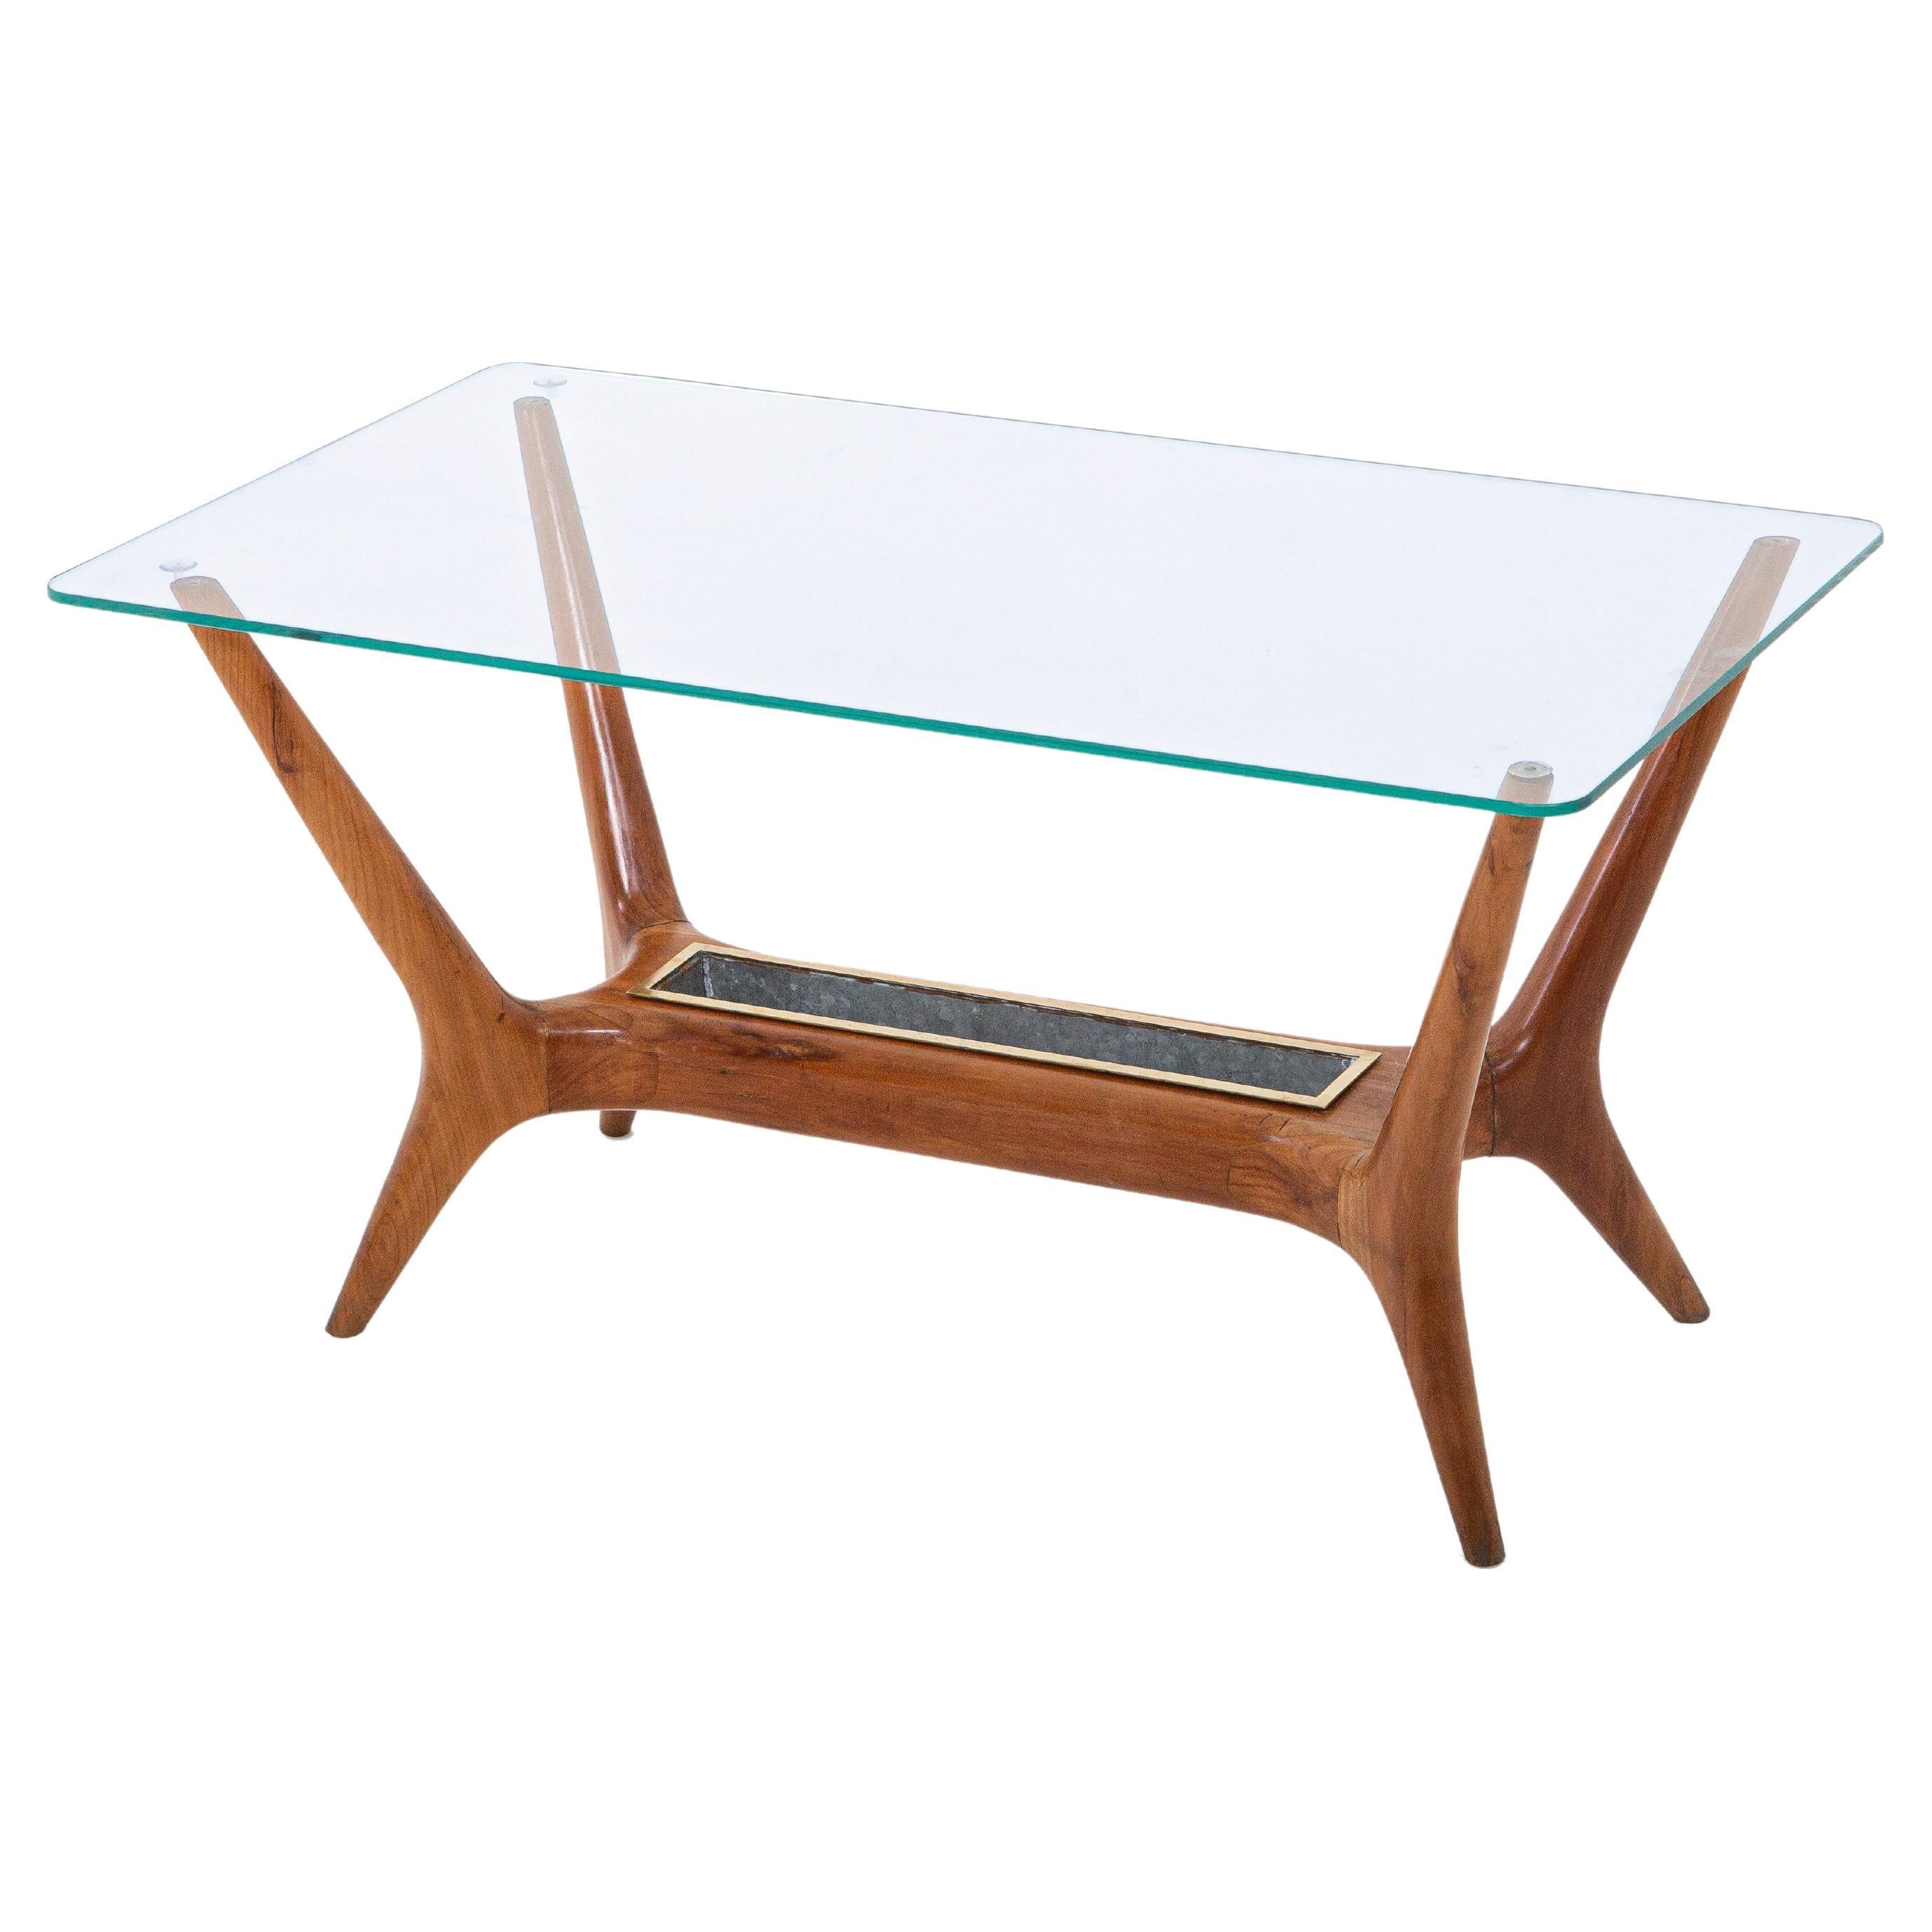 Italian Modernist Cocktail Table Attributed to Gio Ponti For Sale